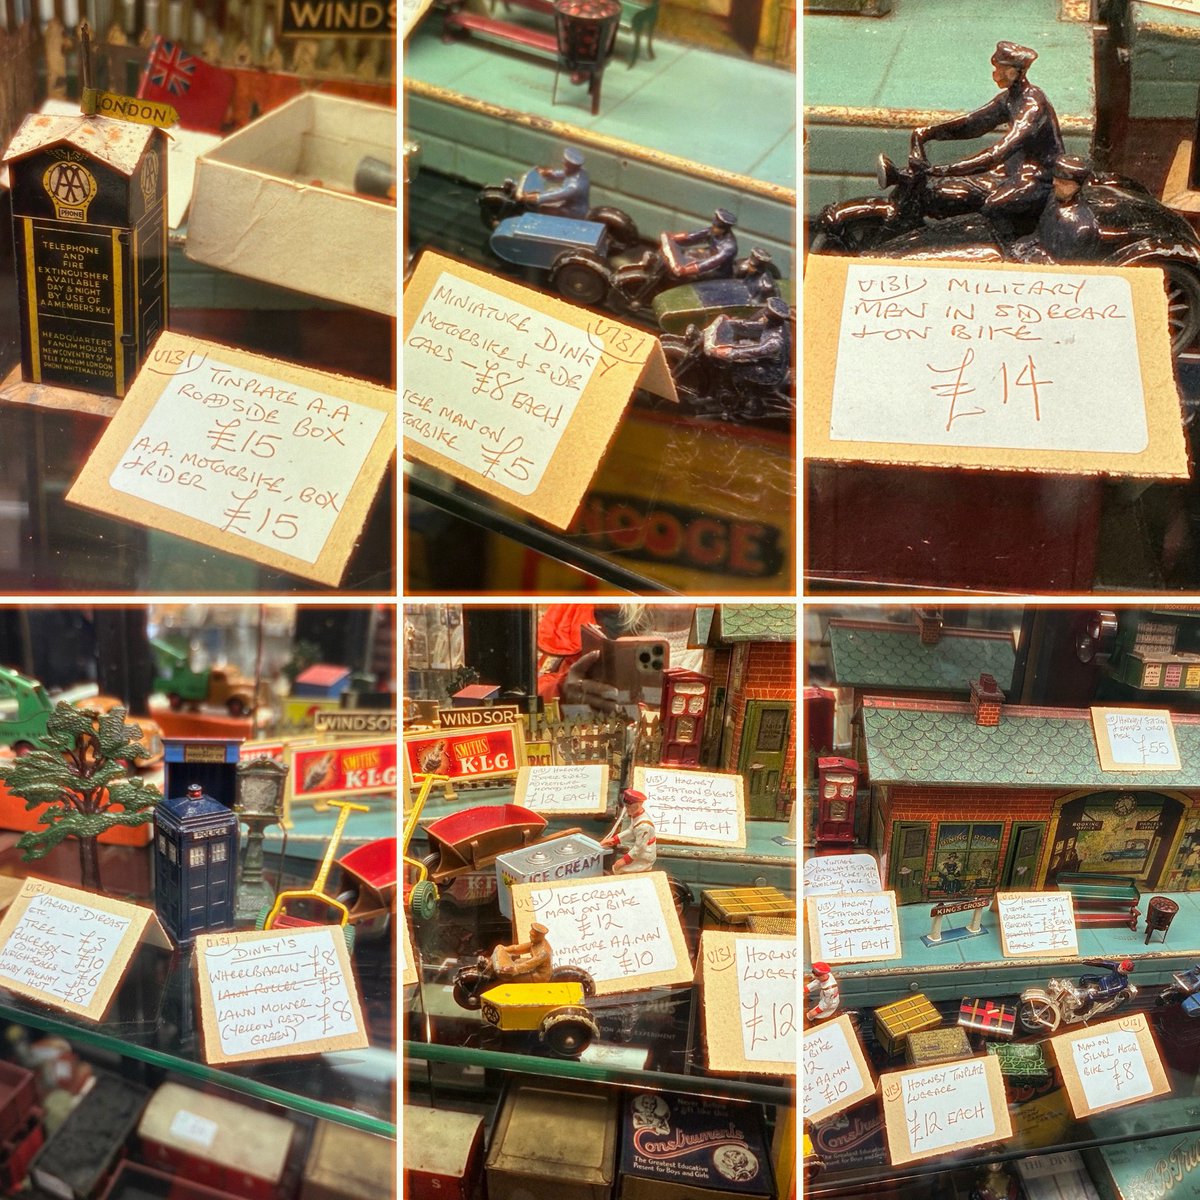 Good morning from a rainy Lincolnshire,beat your Monday blues with a visit to our centre and perhaps a visit to the Decodence cafe. #leads #britains #leadfigures #vintagebritains #leadfarmanimals #motorcycles #astraantiquescentre #hemswell #lincolnshire